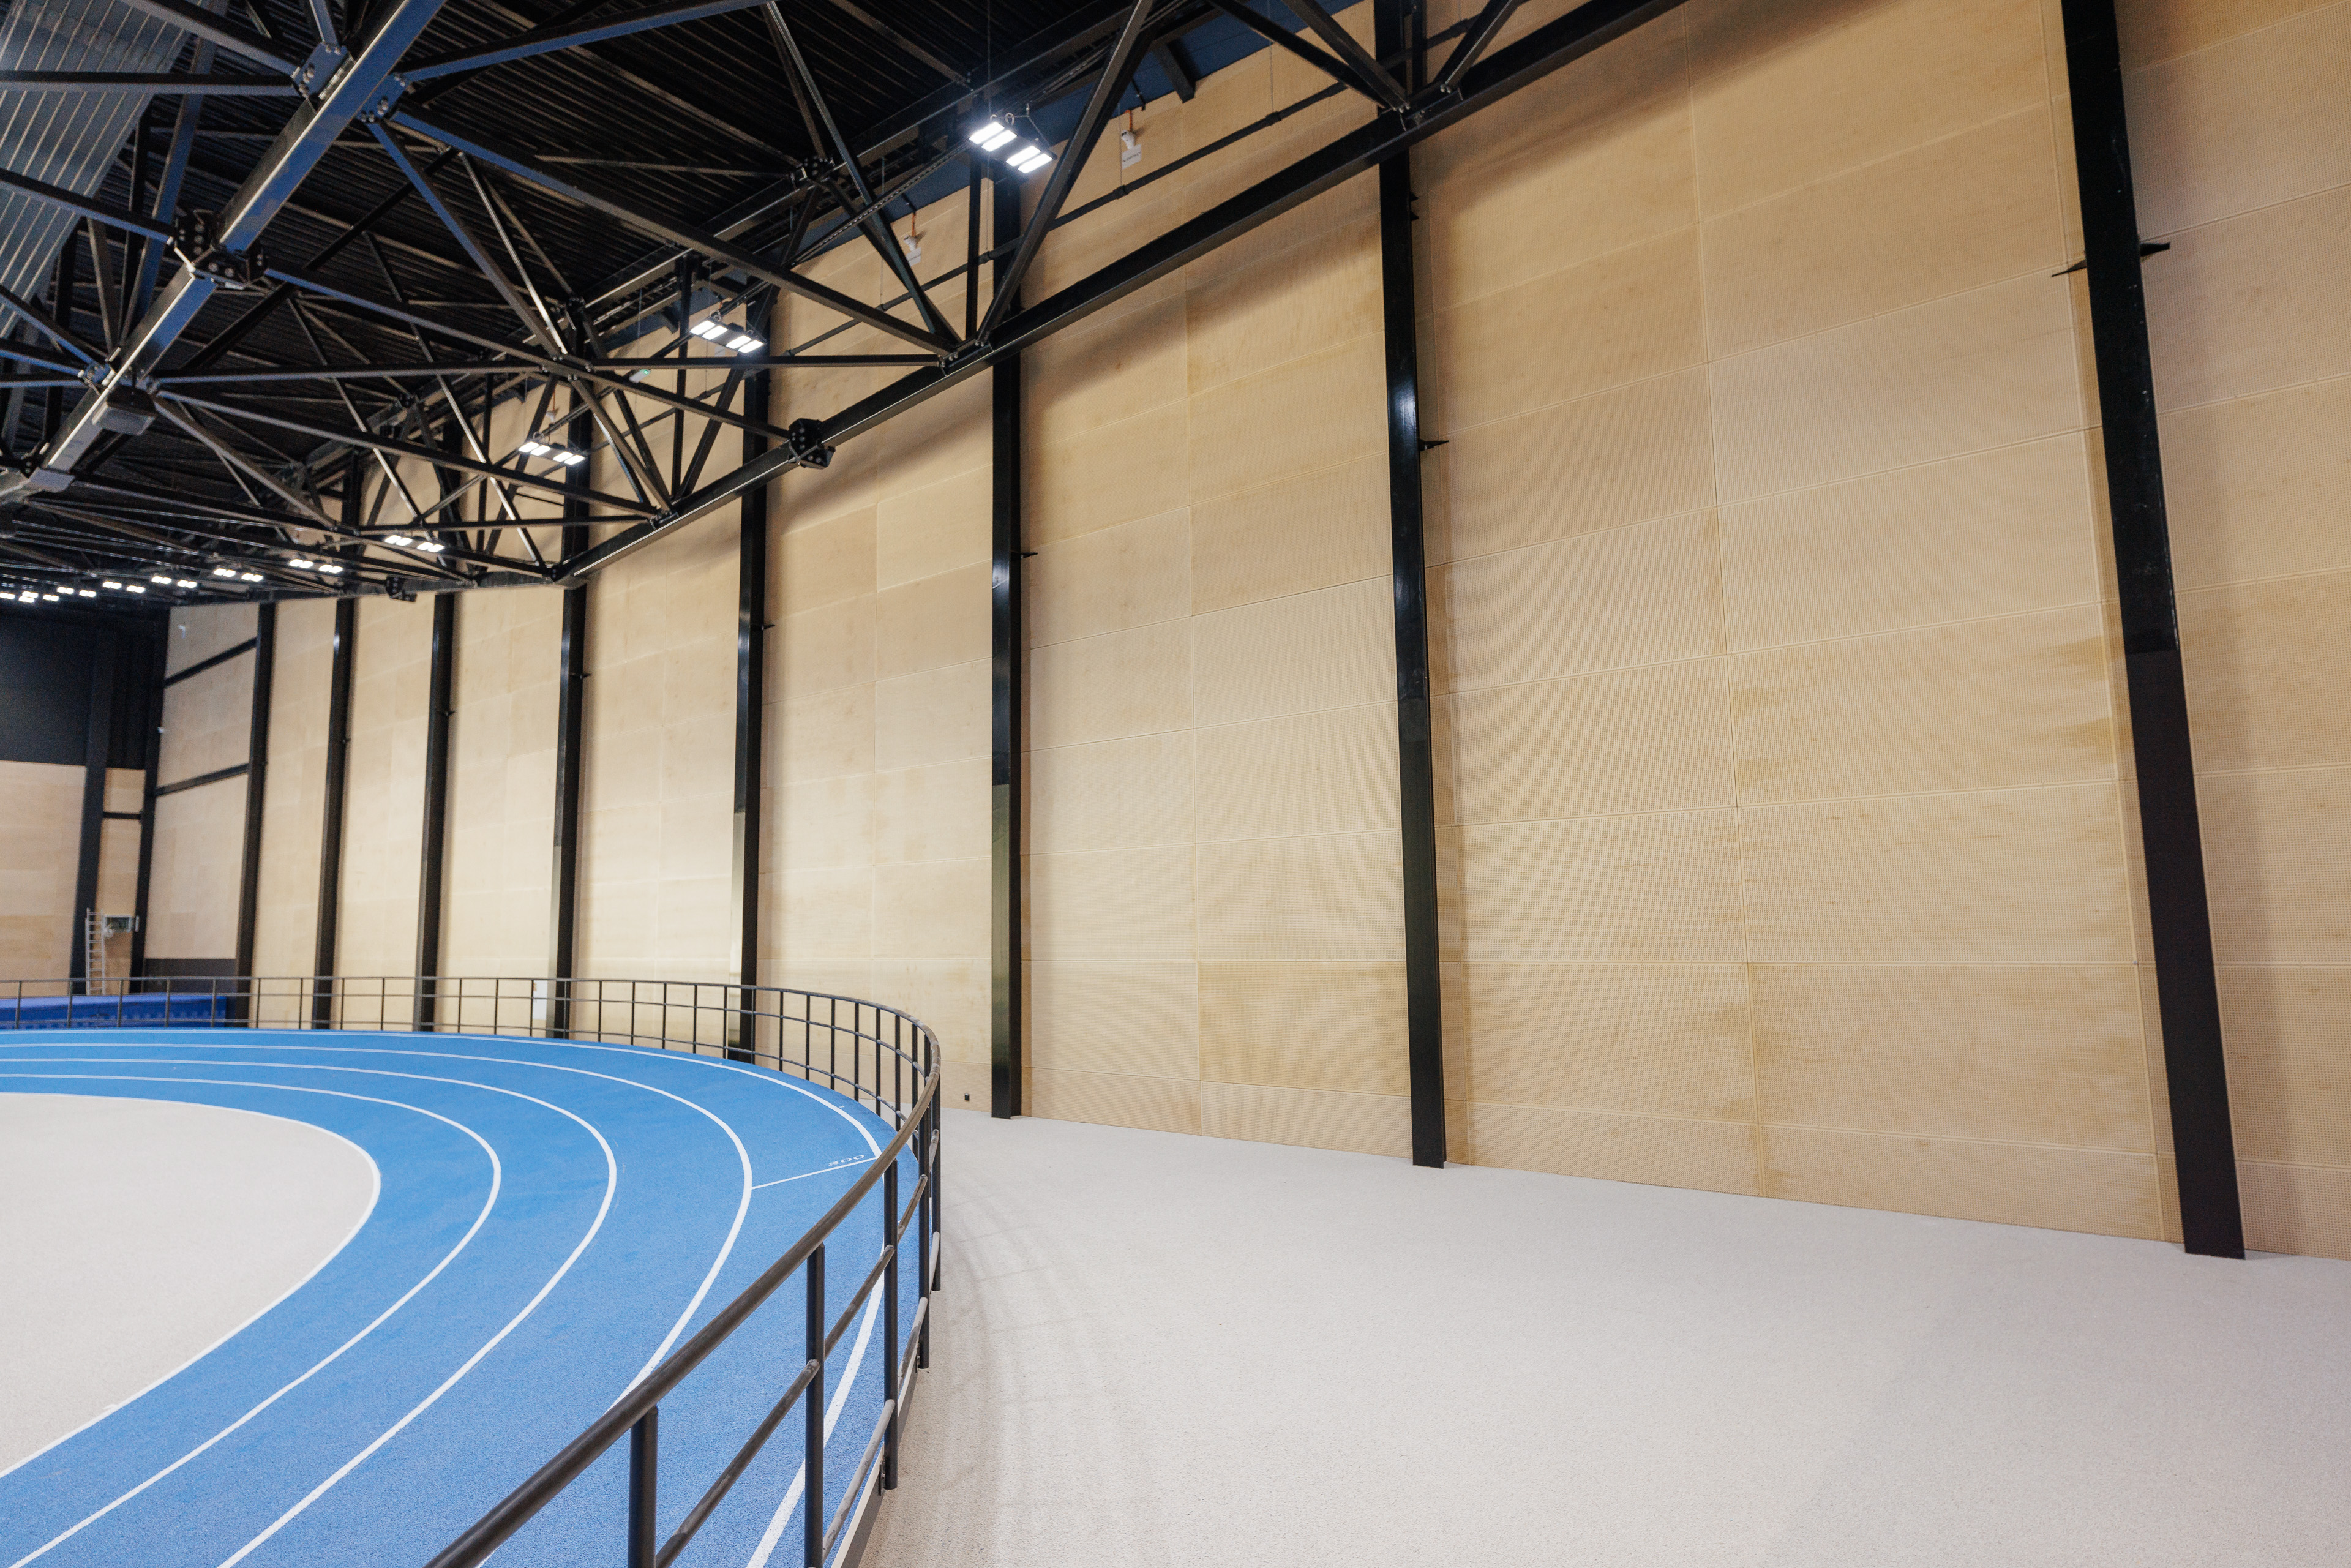 Birch plywood used in construction of sport gymnasium